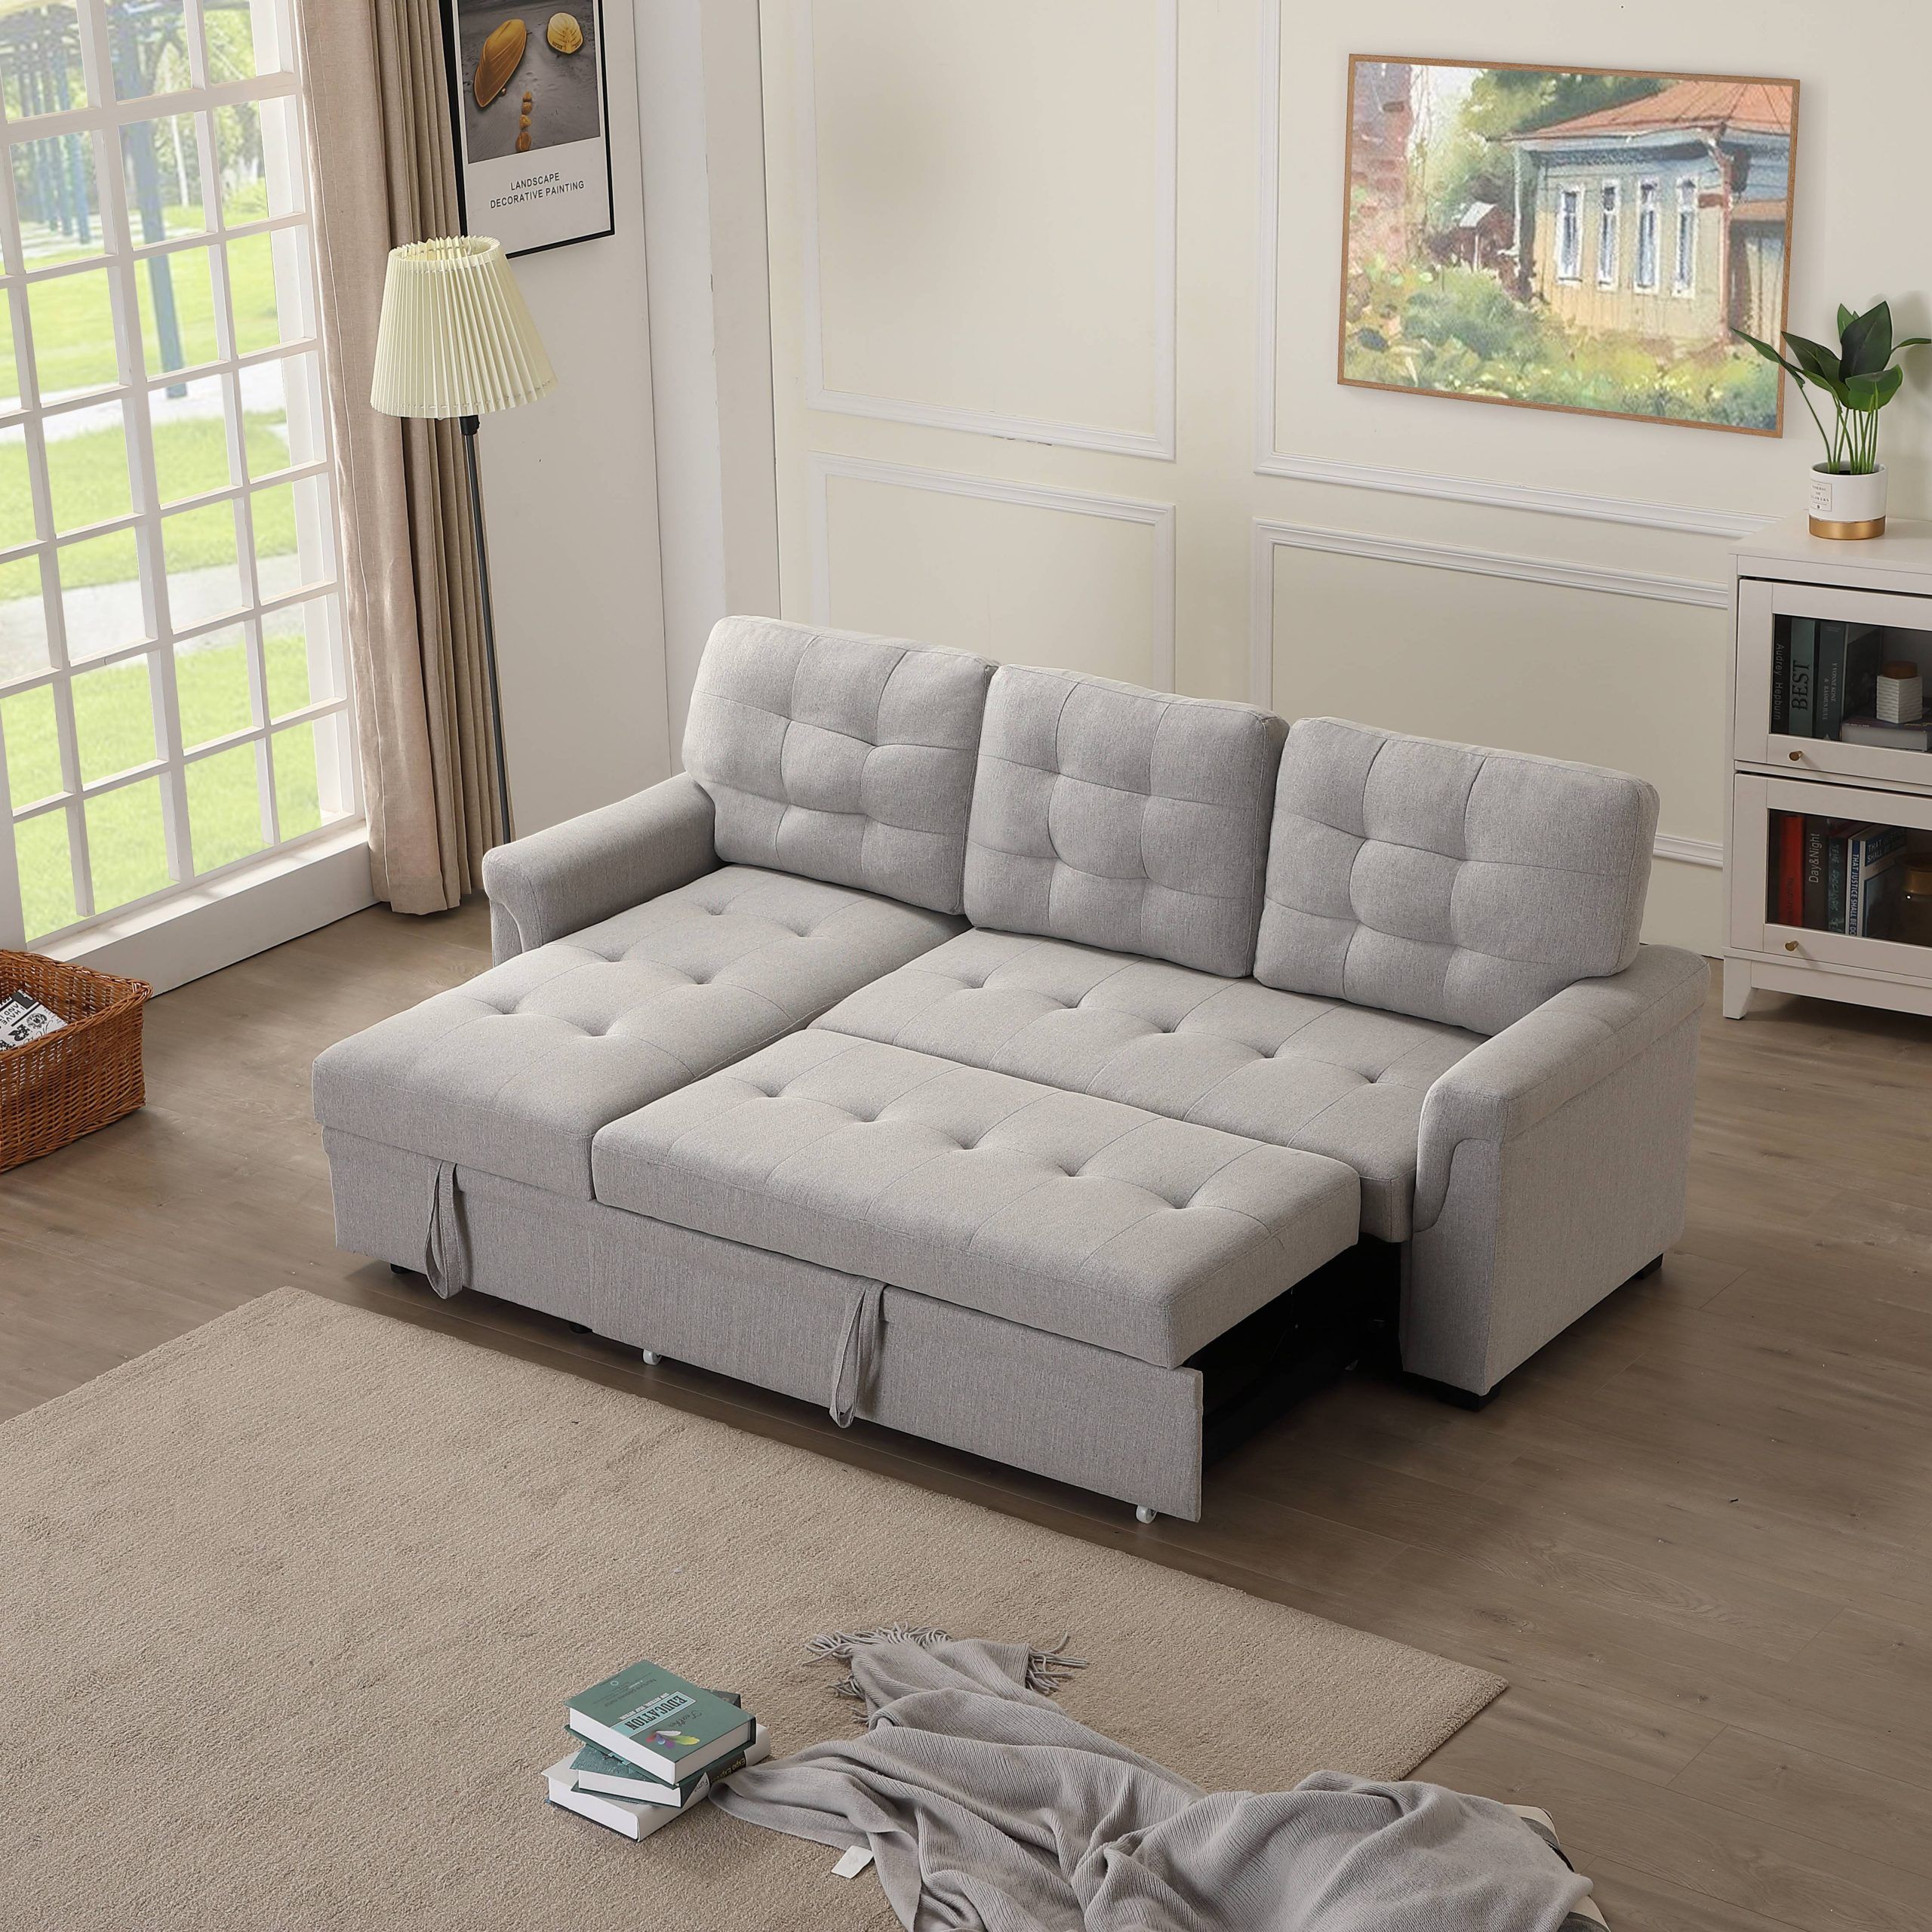 Upholstery Twin Sleeper Tufted Sofa Bed For Livingroom, 33 Inside Liberty Sectional Futon Sofas With Storage (View 14 of 15)